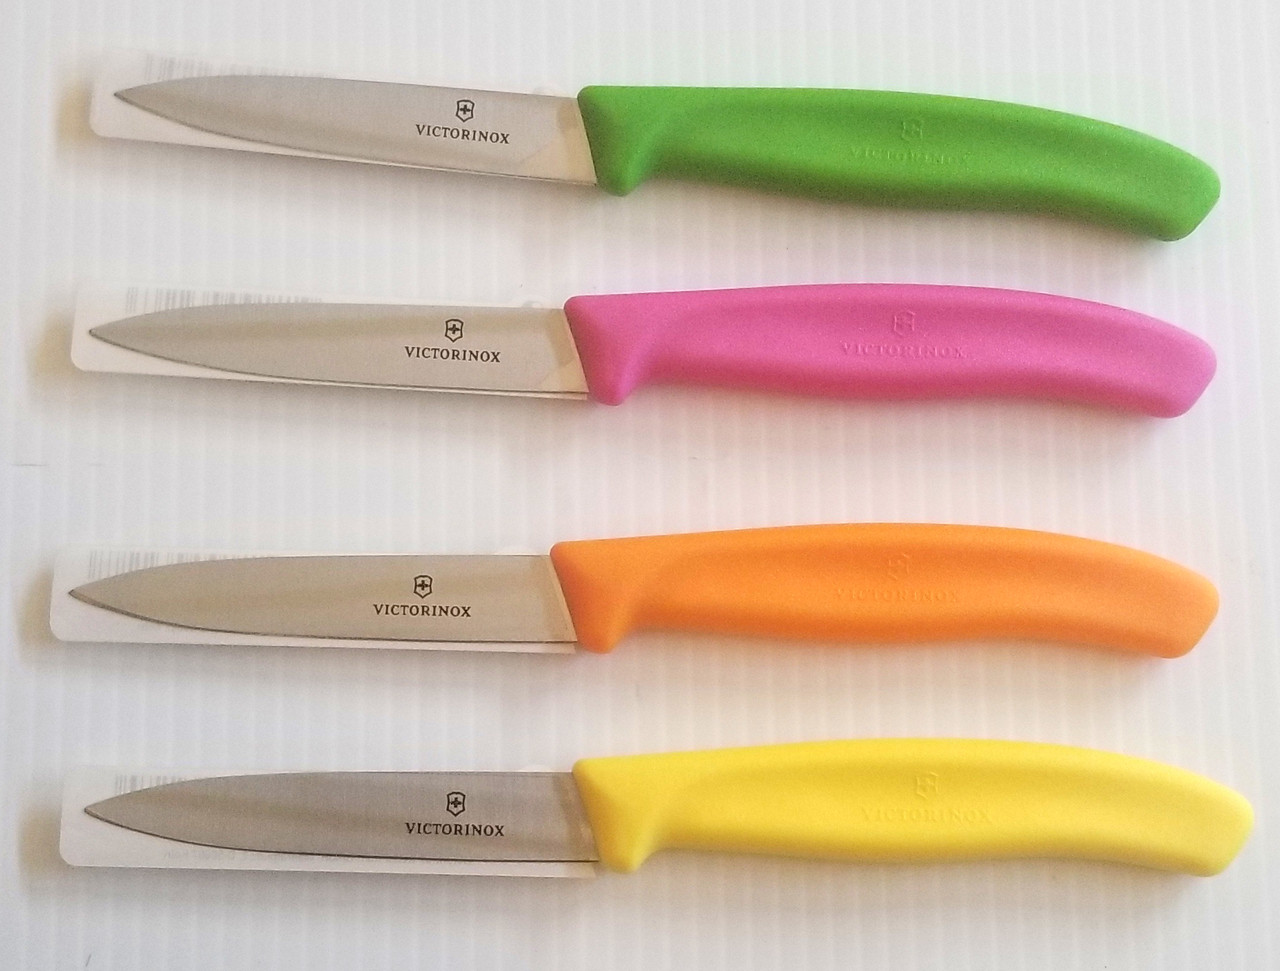 https://cdn11.bigcommerce.com/s-c3dtlhs339/images/stencil/1280x1280/products/330/1352/Victorinox_colored_paring_knives__90781.1542665620.jpg?c=2?imbypass=on